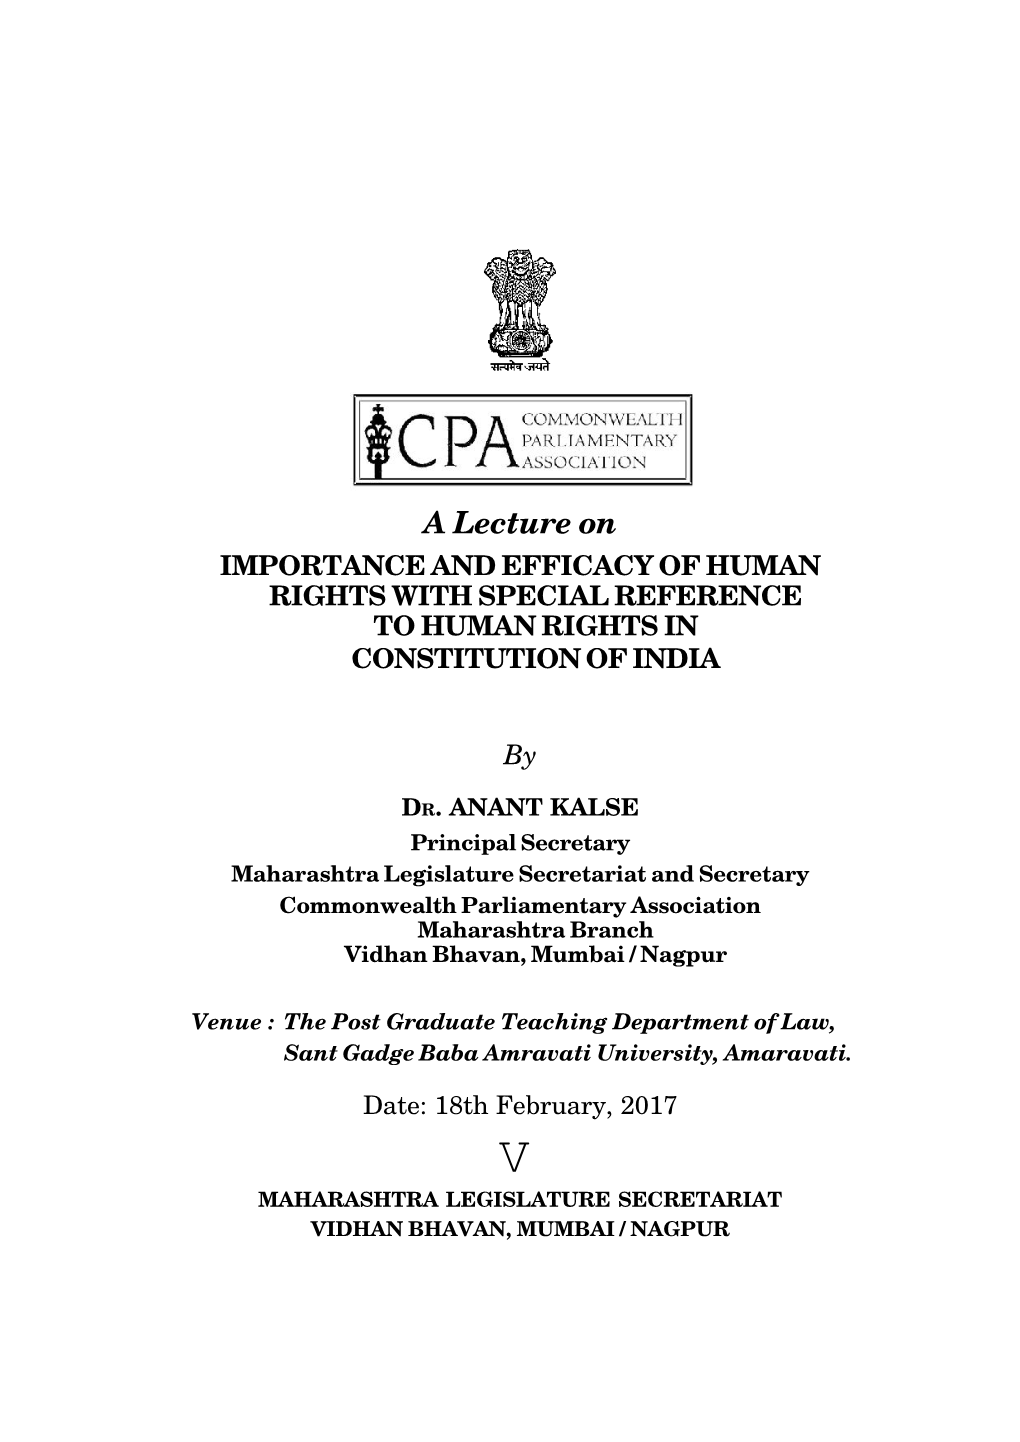 A Lecture on IMPORTANCE and EFFICACY of HUMAN RIGHTS with SPECIAL REFERENCE to HUMAN RIGHTS in CONSTITUTION of INDIA